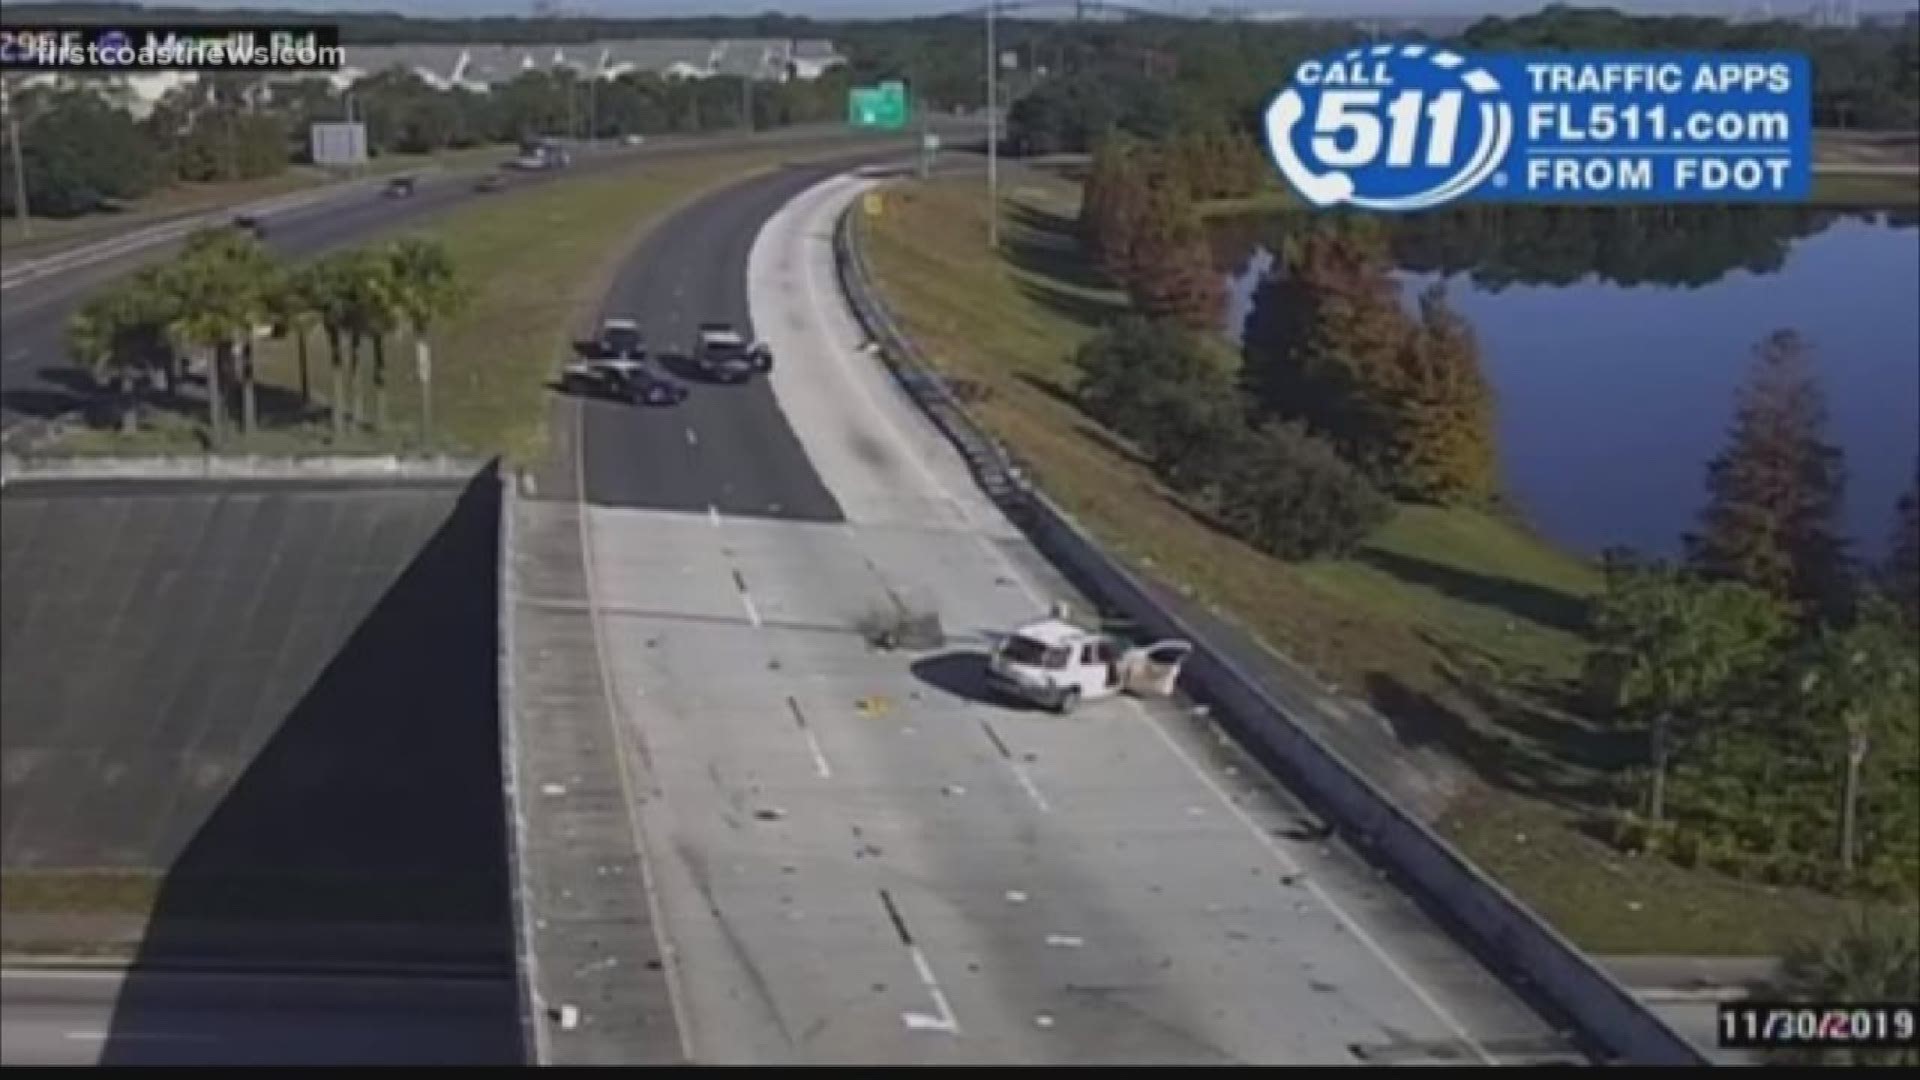 FHP said a 55-year-old man struck a barrier after losing control of his vehicle while going around a curve near Merrill Road and I-295.